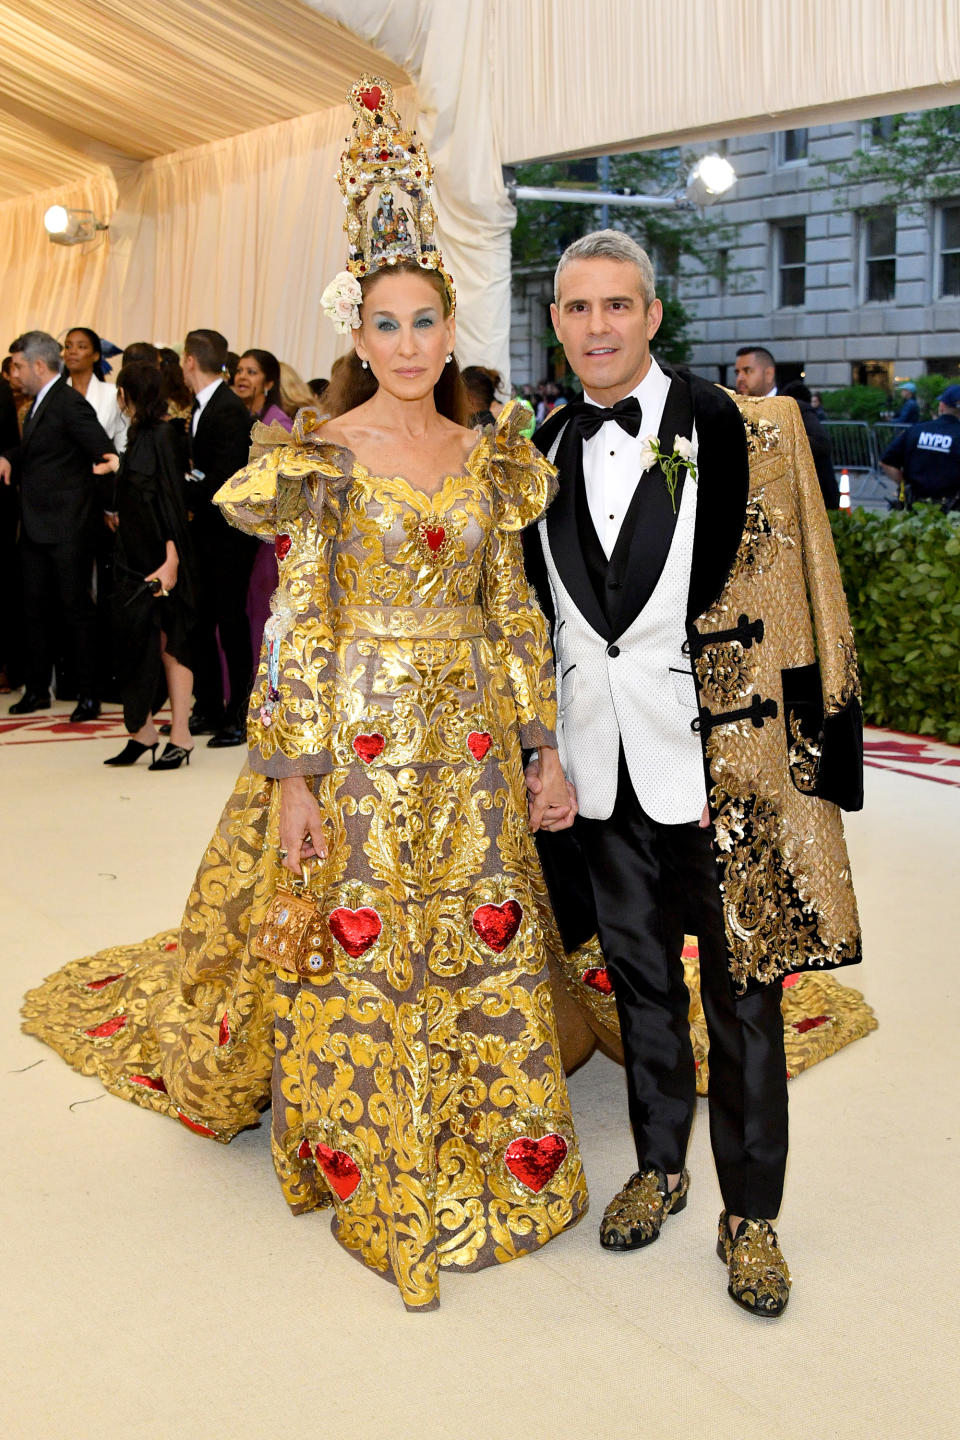 <p>Sarah Jessica Parker brought things to the next level in this Dolce & Gabbanna gold emroidered gown and towering headpiece. Photo: Getty Images </p>